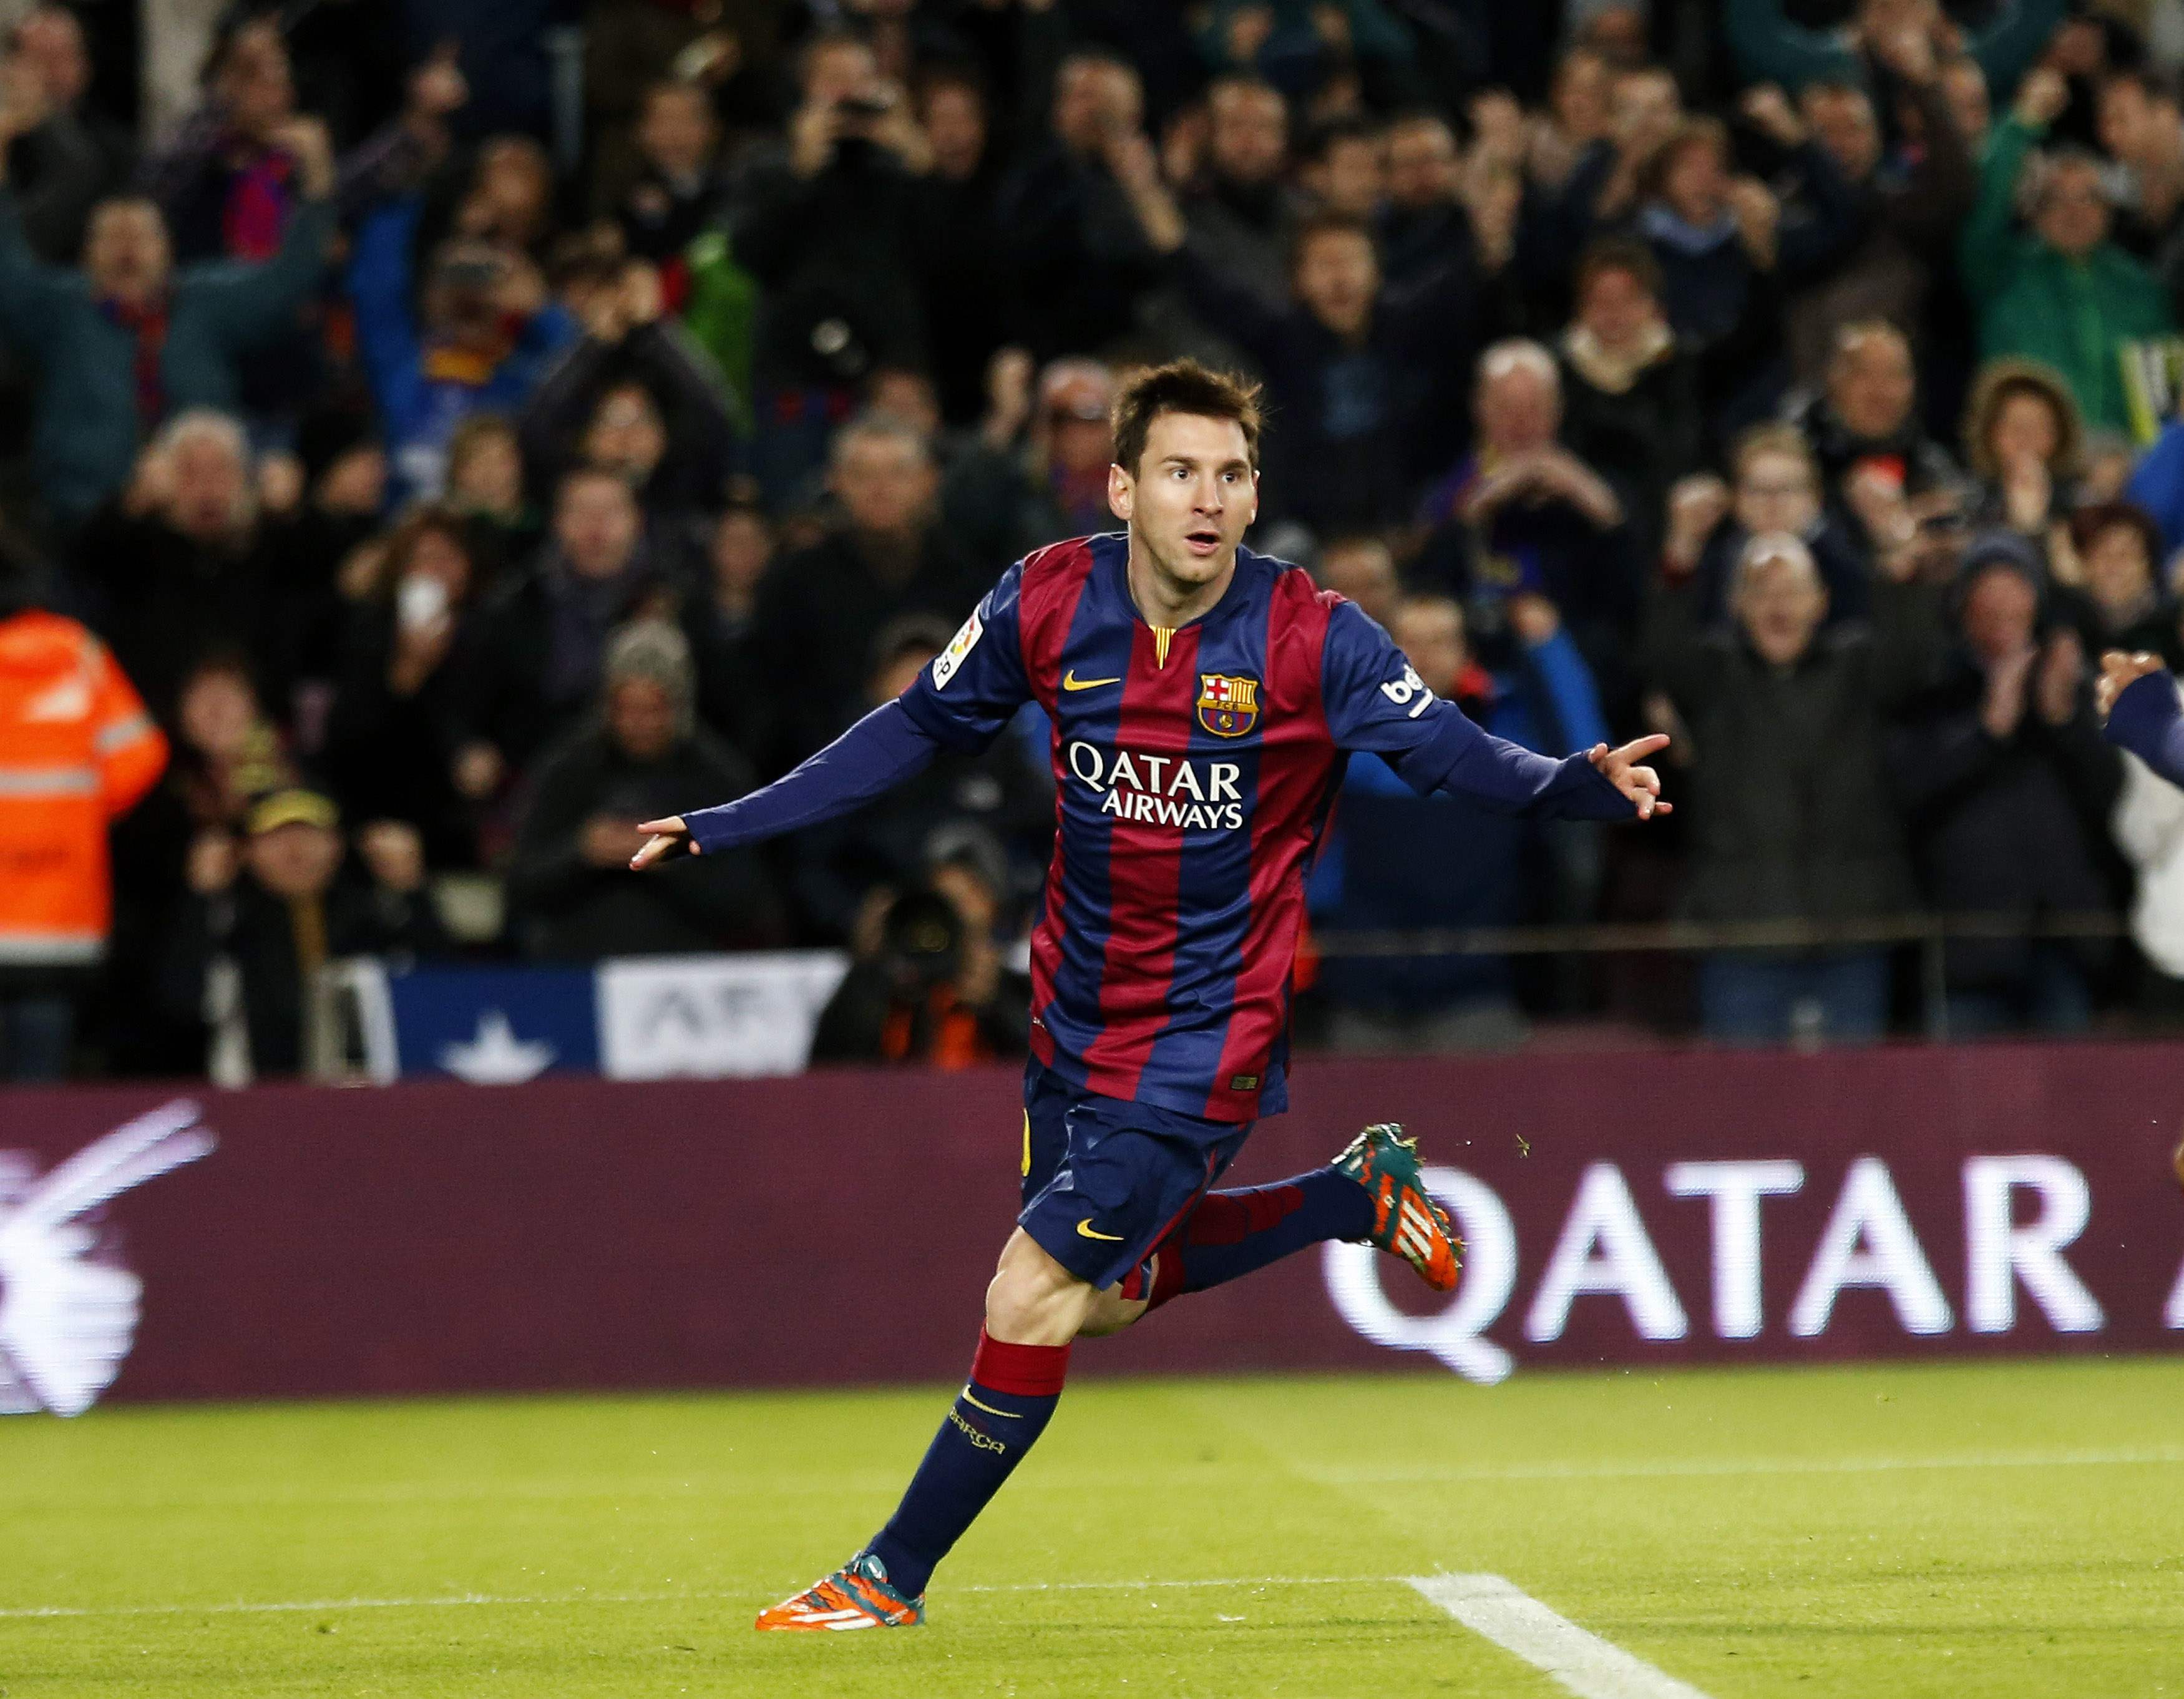 Hat-trick and 400th Barca goal for Messi